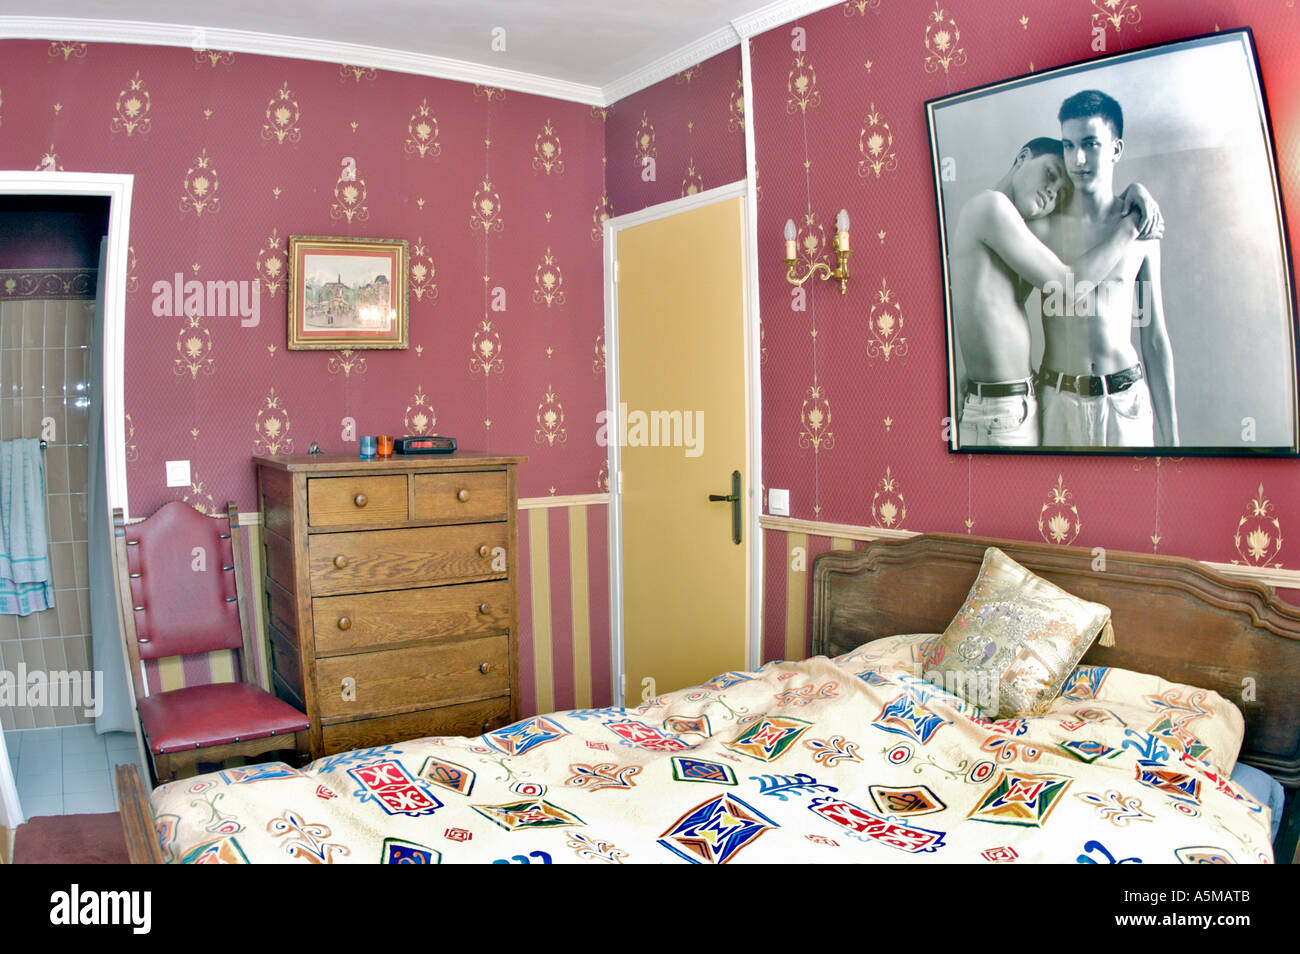 Interior Decoration  Bedroom in  Apartment Flat Red Wallpaper, Home Improvement, recycled furniture, interior design 50s Stock Photo